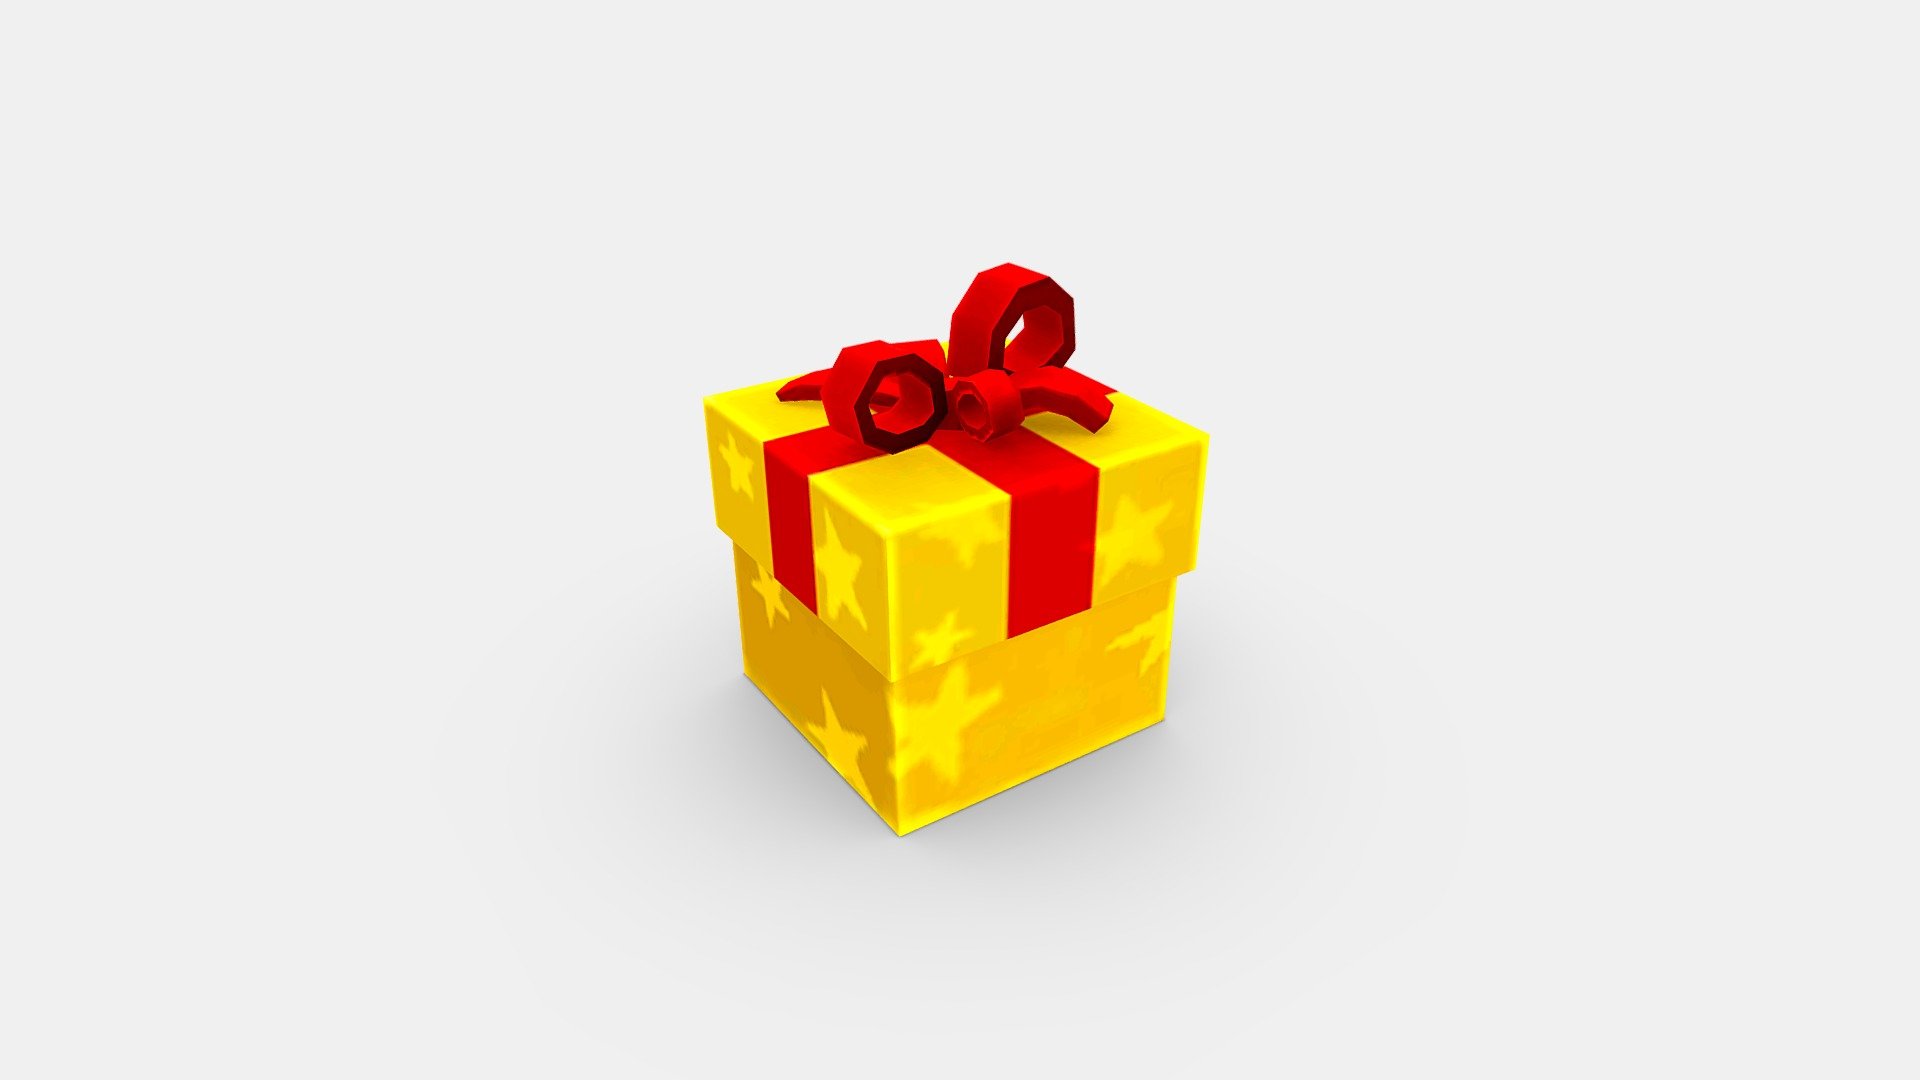 The treasure chest can be opened, there are a bunch of gems in it, but I will not use animation to demonstrate the opening process - Cartoon Diamond Gift Box - Gem Gift Box - Buy Royalty Free 3D model by ler_cartoon (@lerrrrr) 3d model